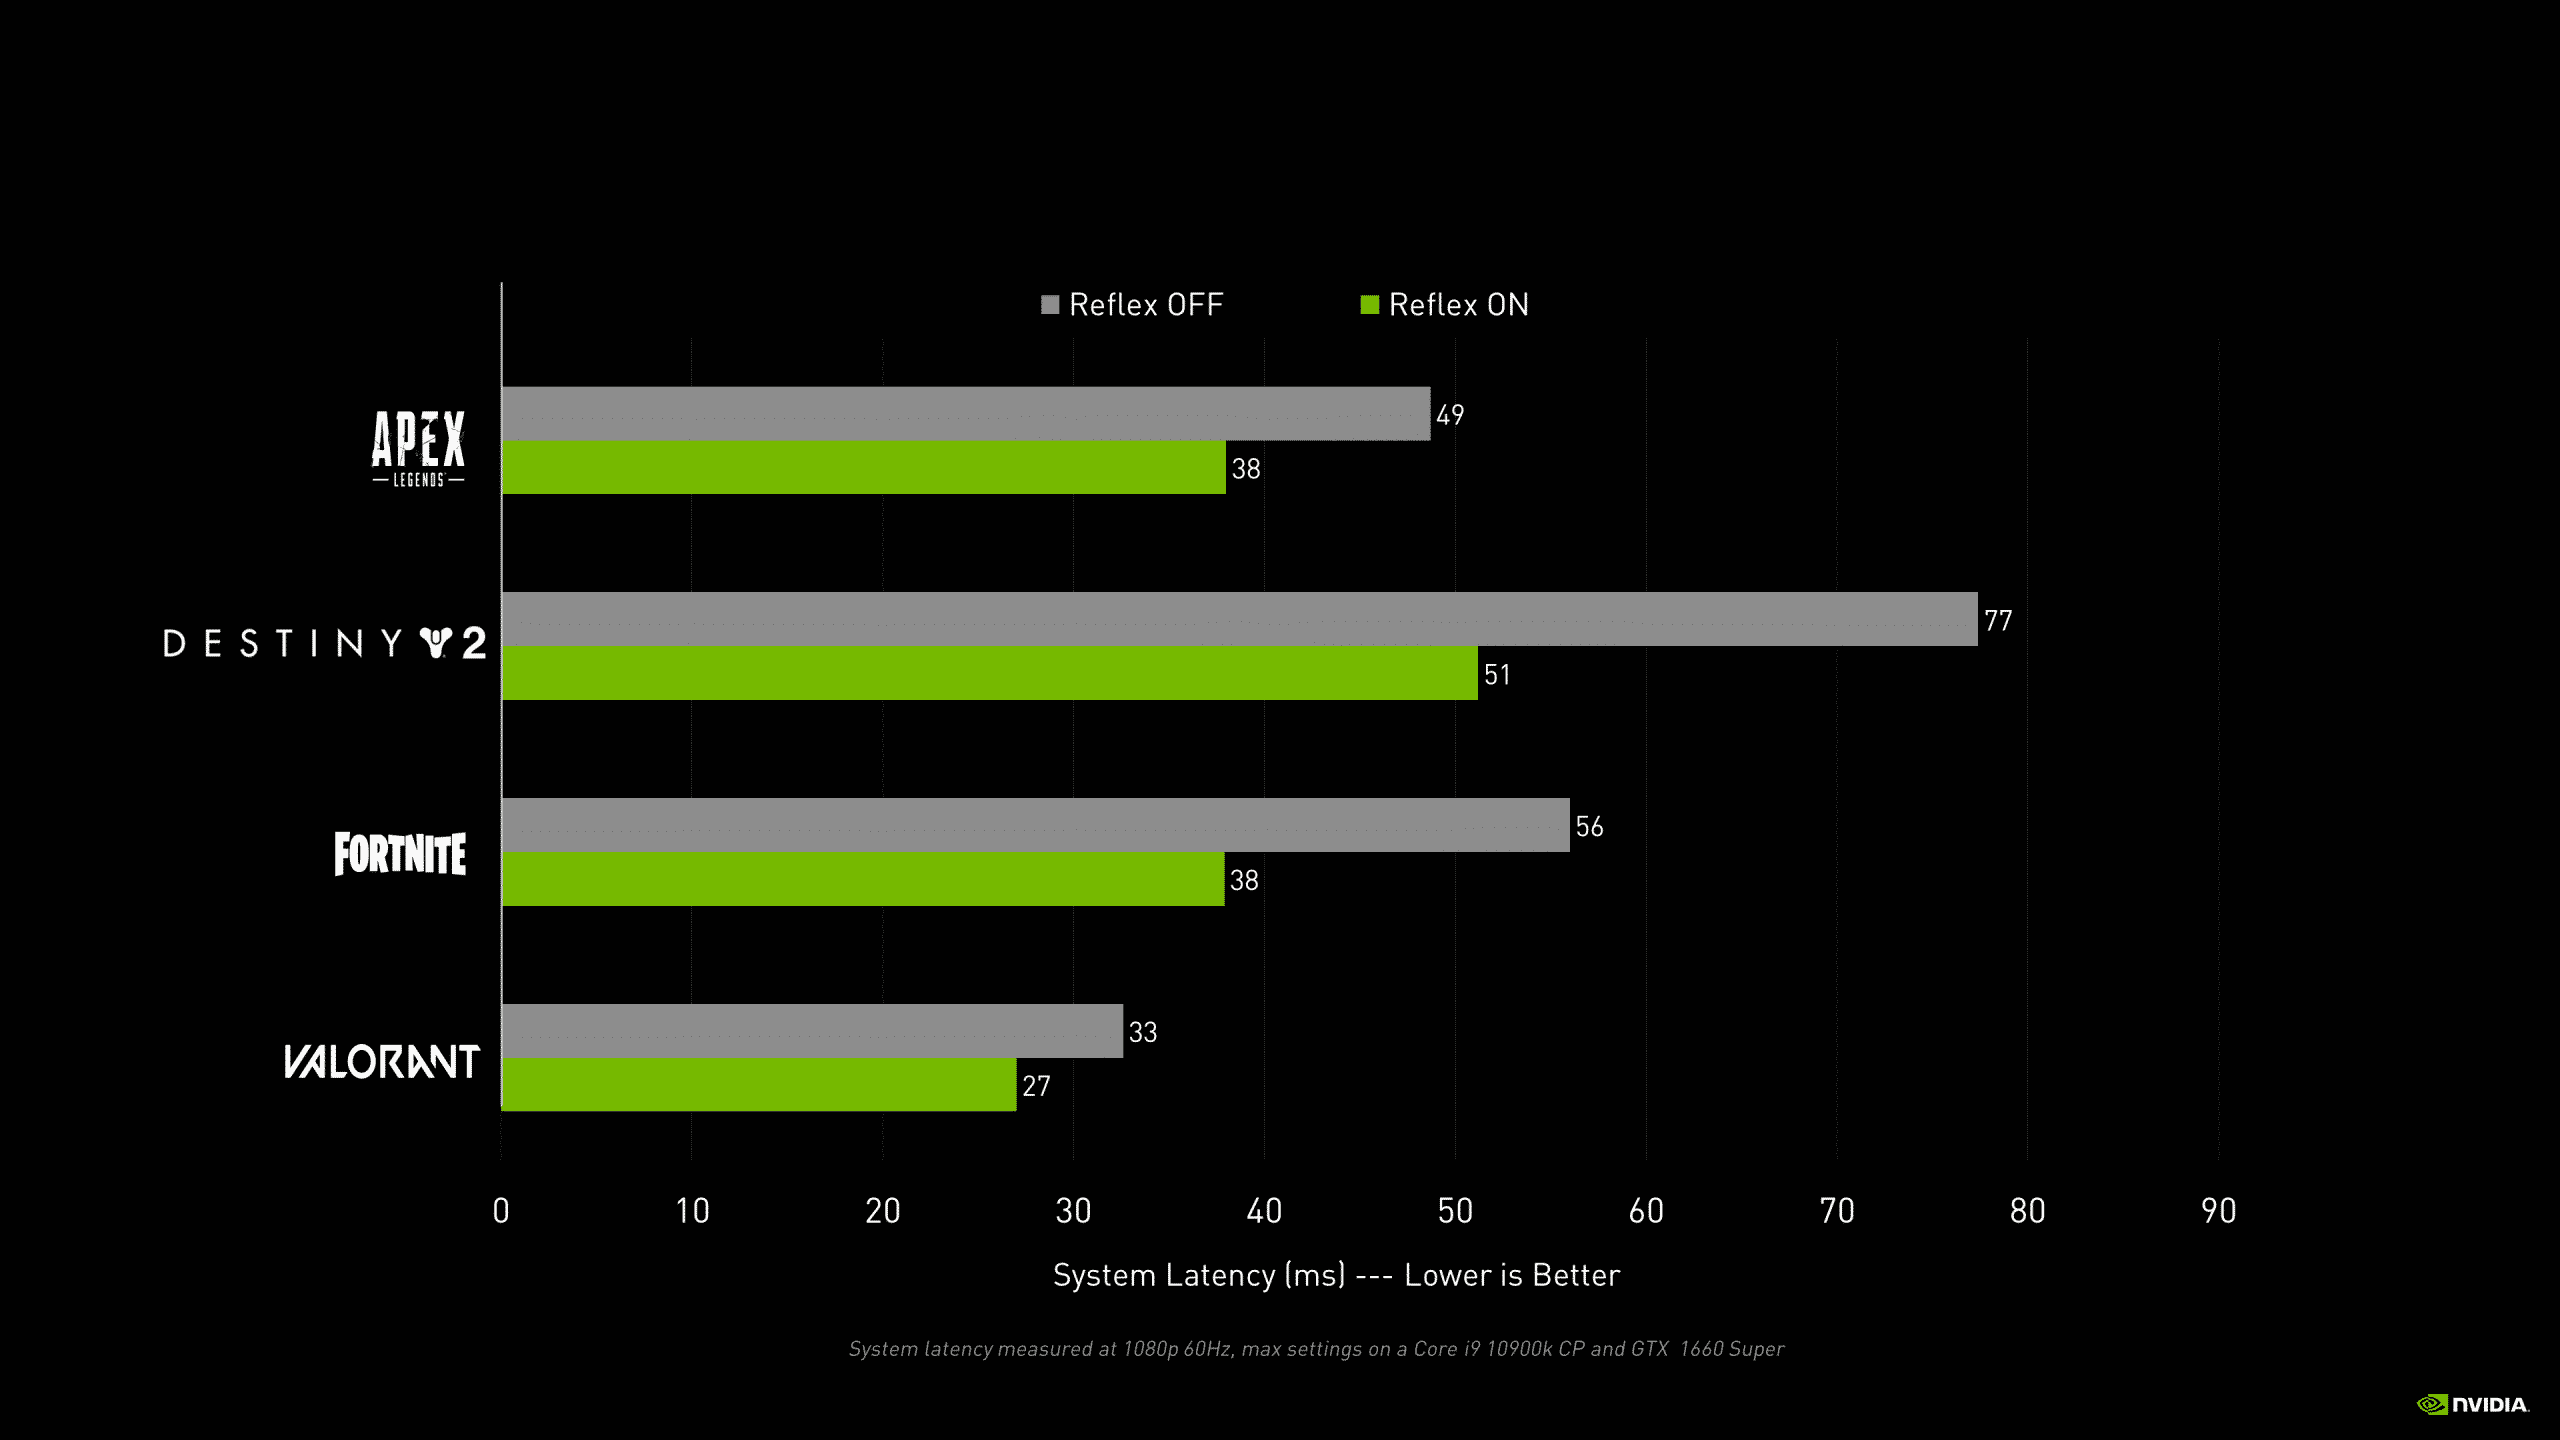 nvidia reflex on off system latency performance chart